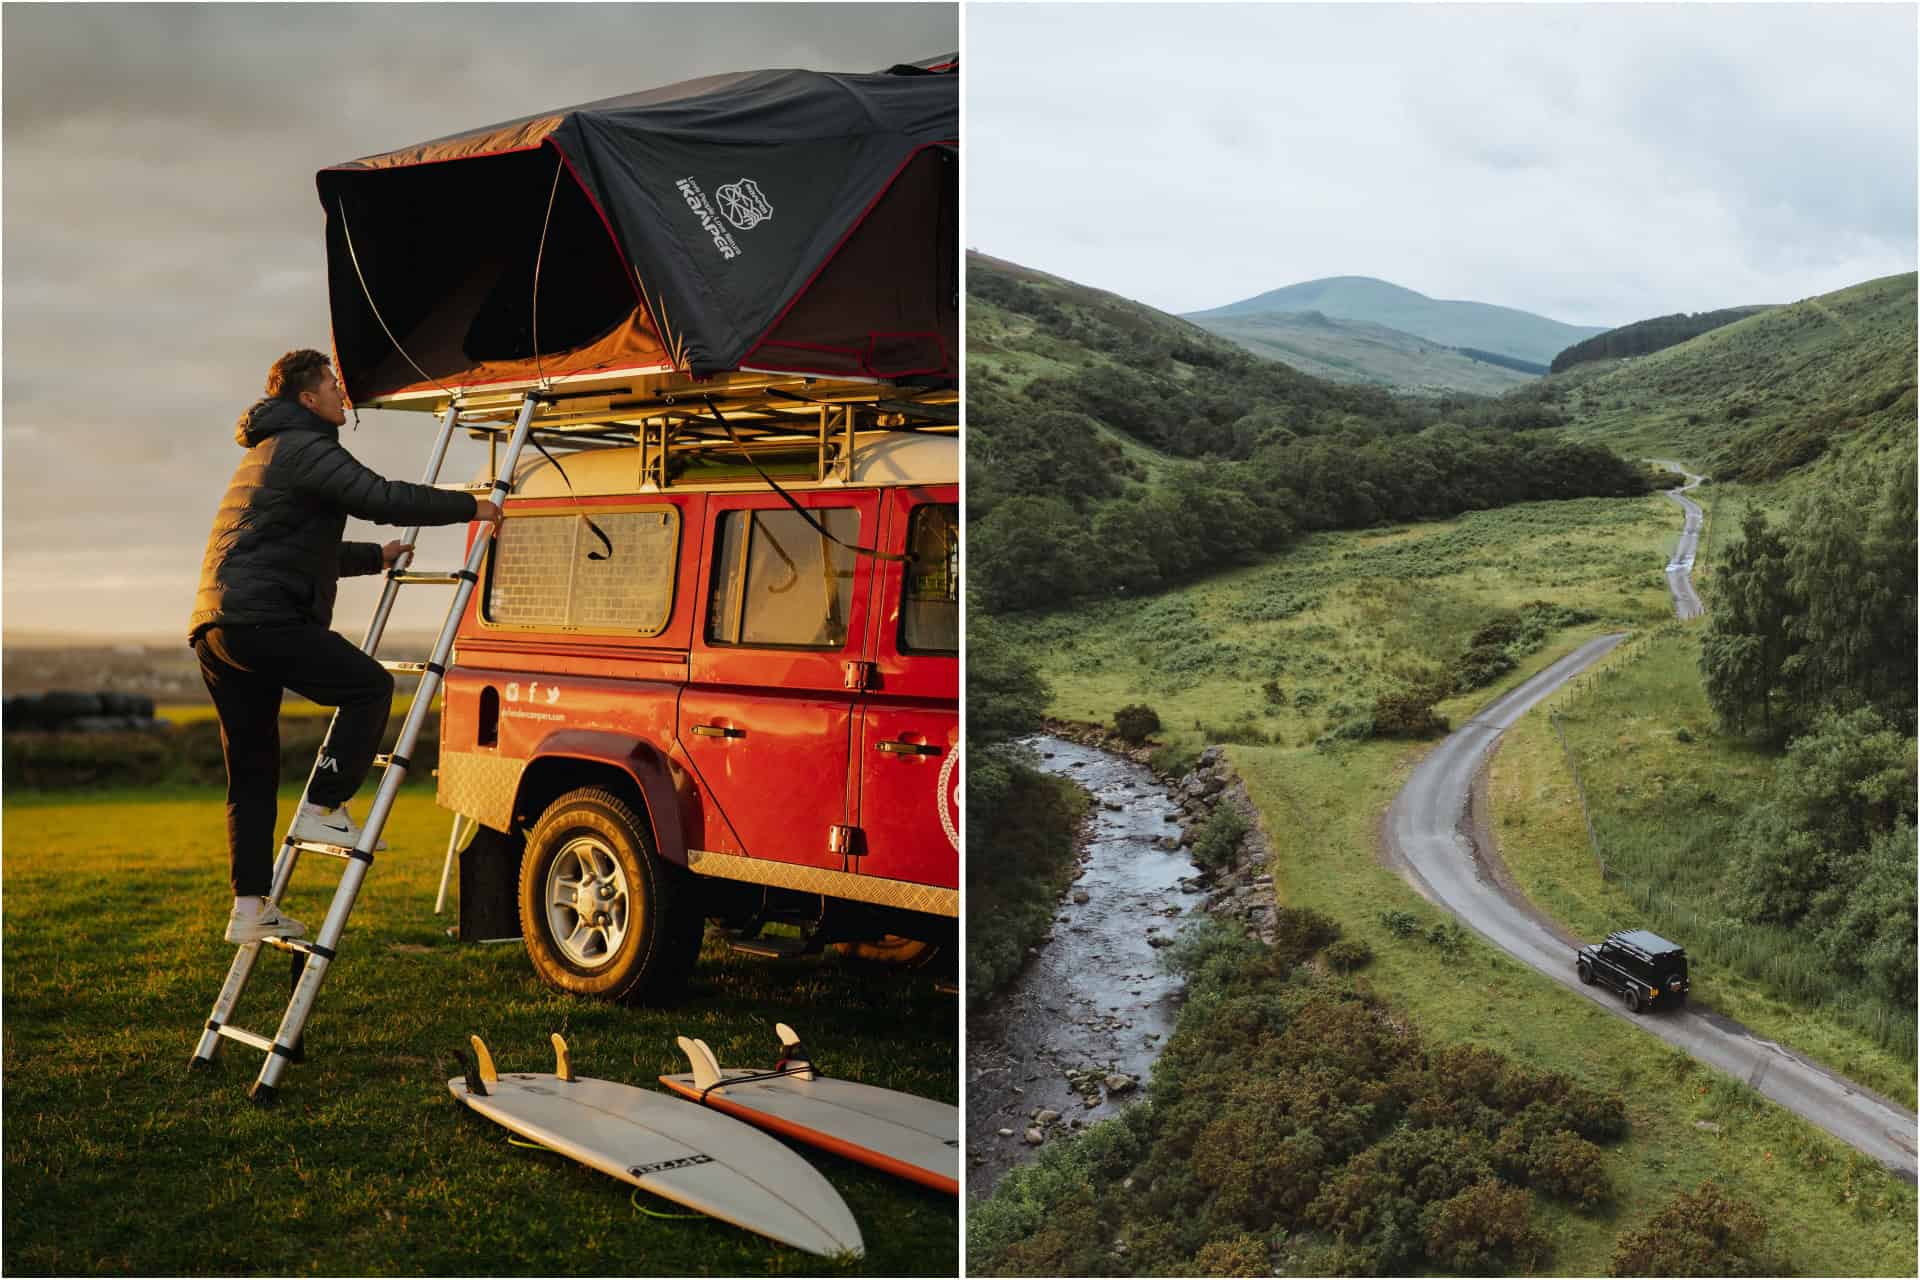 Off-grid, wifi-free adventures for the family this summer